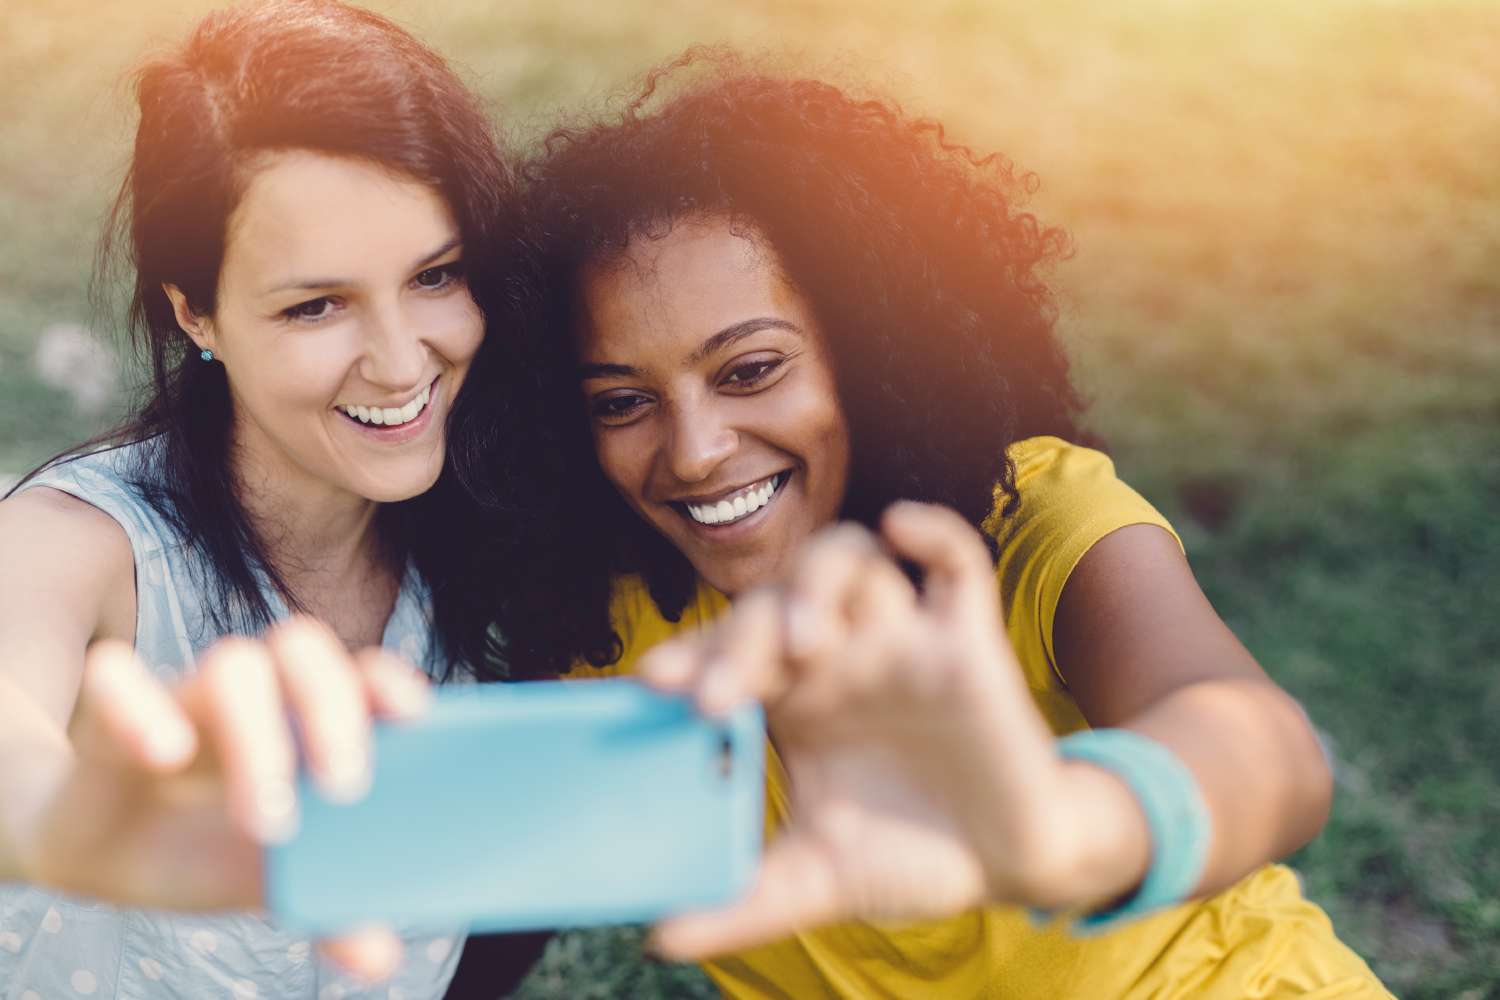 Young women taking a selfie, probably not considering if GDPR will shift perspectives on personal data